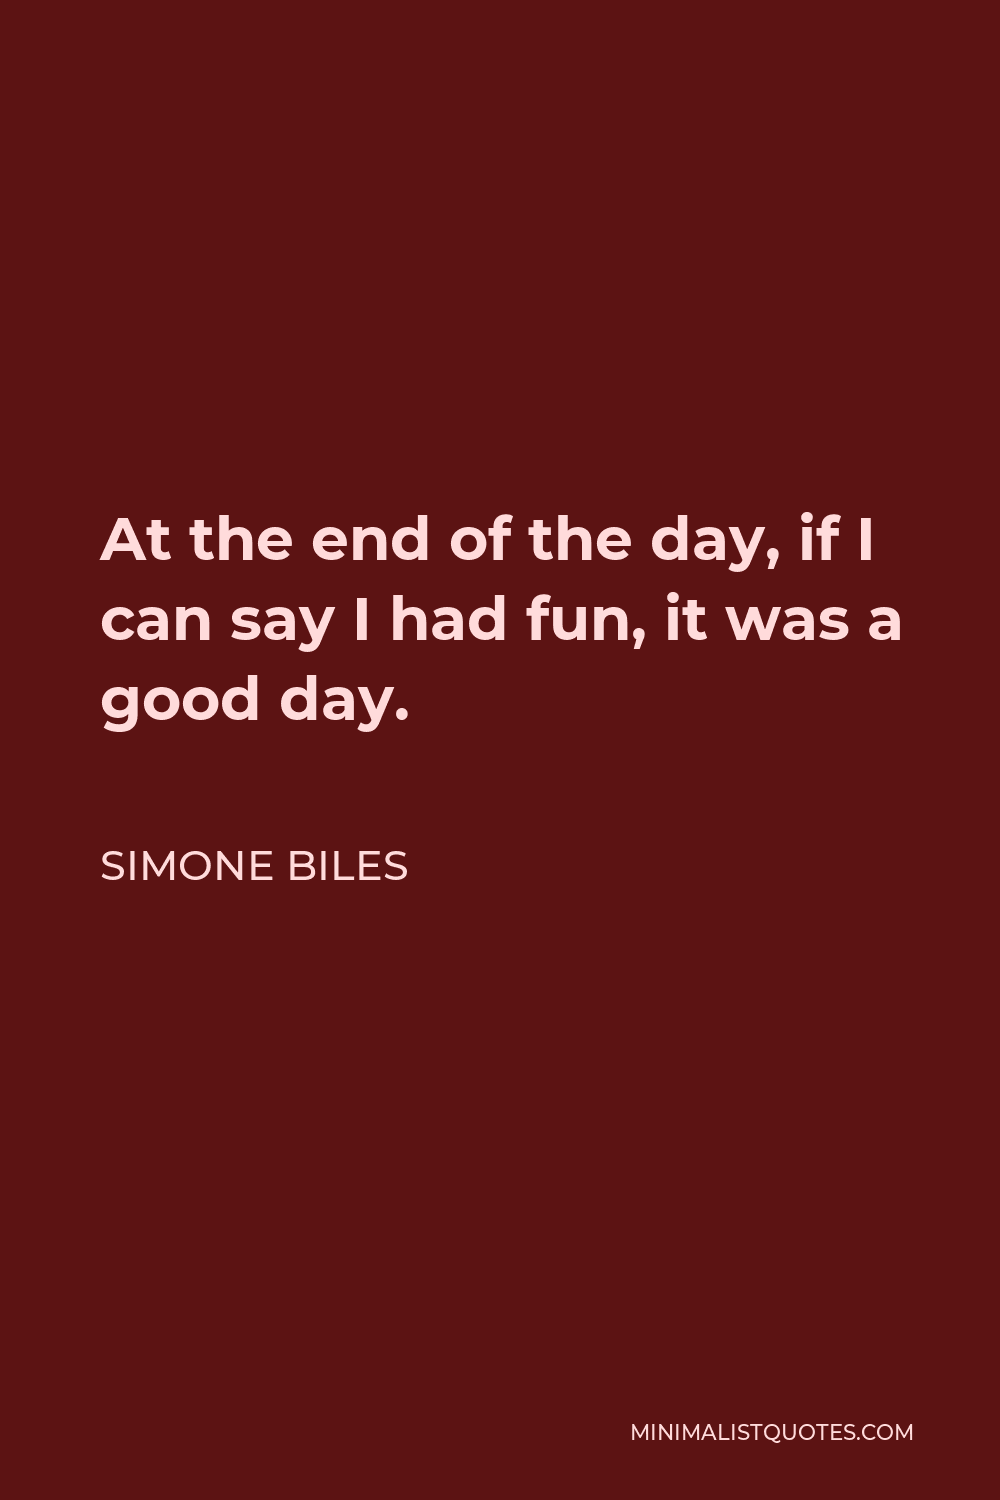 Simone Biles Quote - At the end of the day, if I can say I had fun, it was a good day.